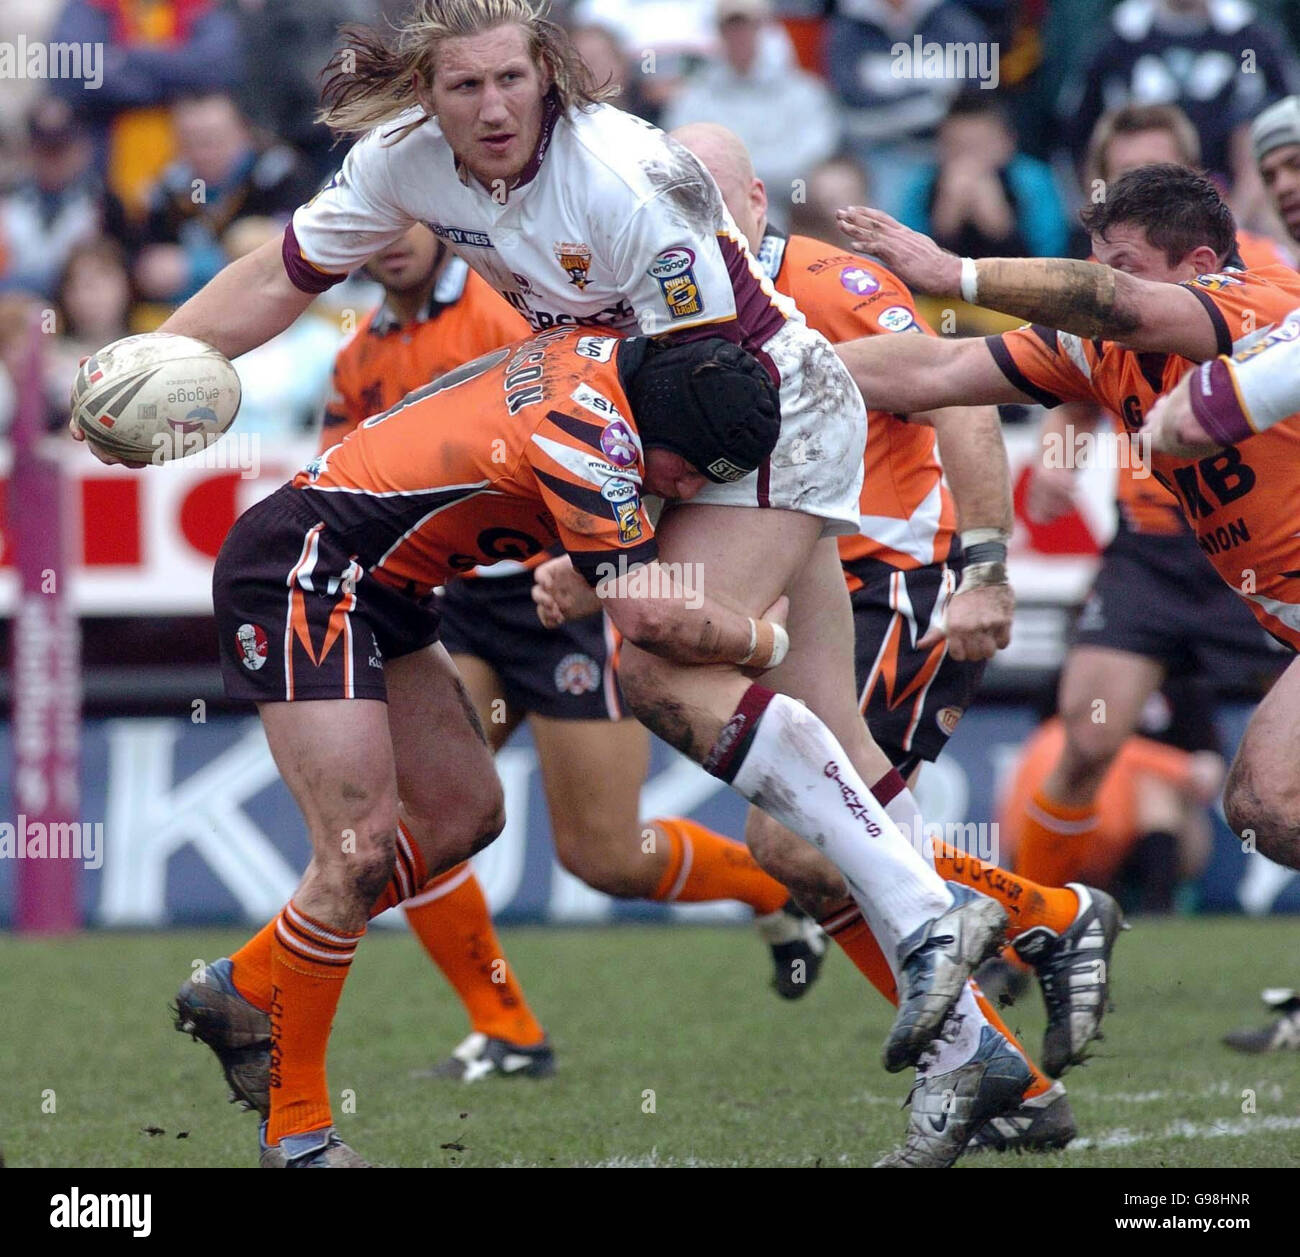 Huddersfield Giants Eorl Crabtree is stopped close to the line by Castleford's Michael Shenton during the Engage Super League match at The Jungle, Castleford, Sunday March 26, 2006. PRESS ASSOCIATION Photo. Photo credit should read: PA. **** Stock Photo